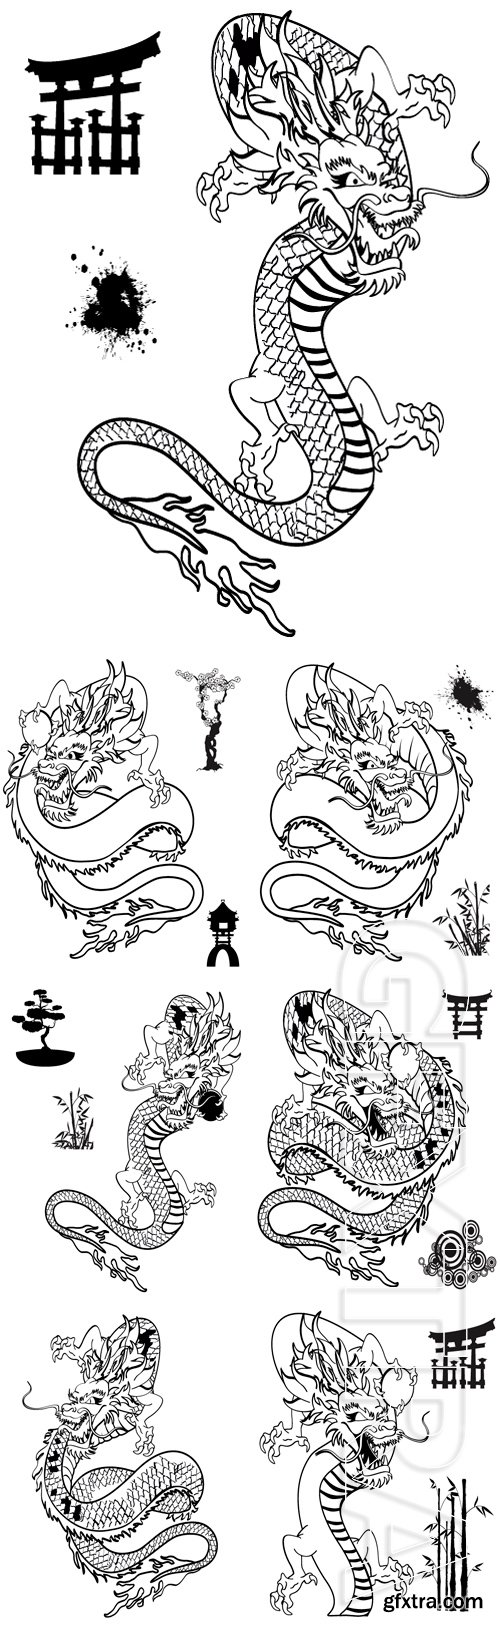 Stock Vectors - Japanese dragon tattoo in vector format very easy to edit